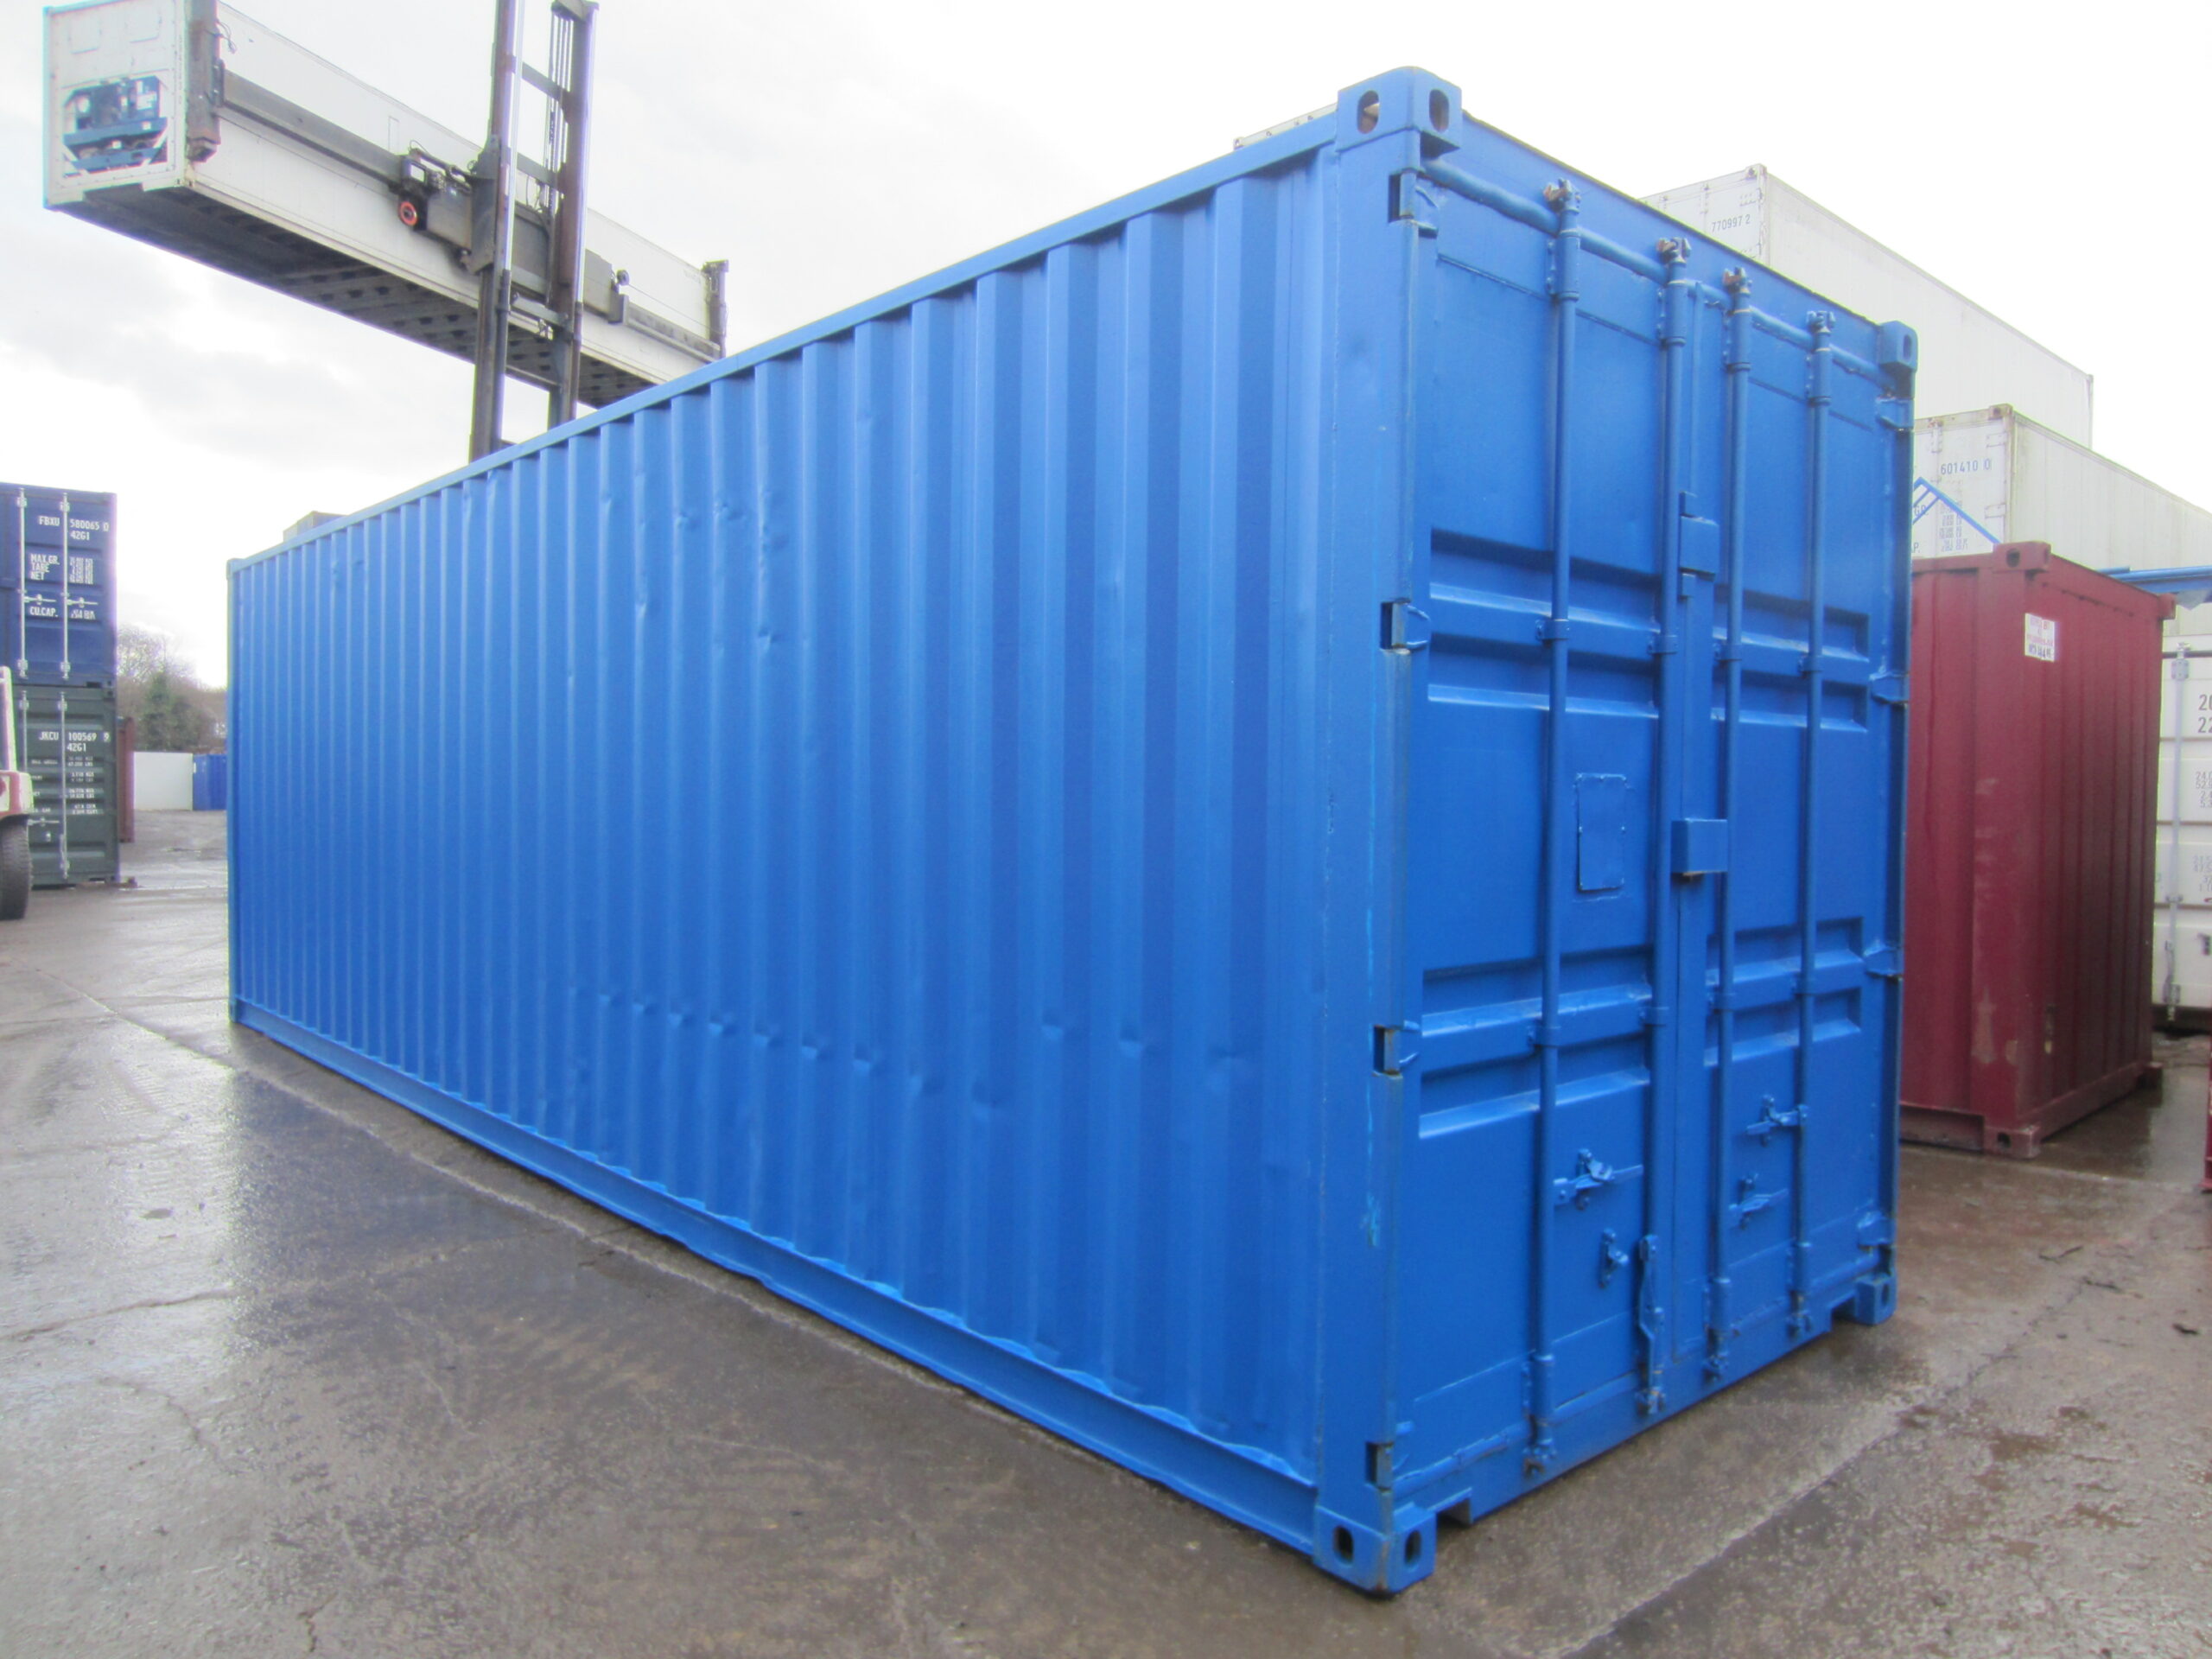 Shipping container hire in Huddersfield